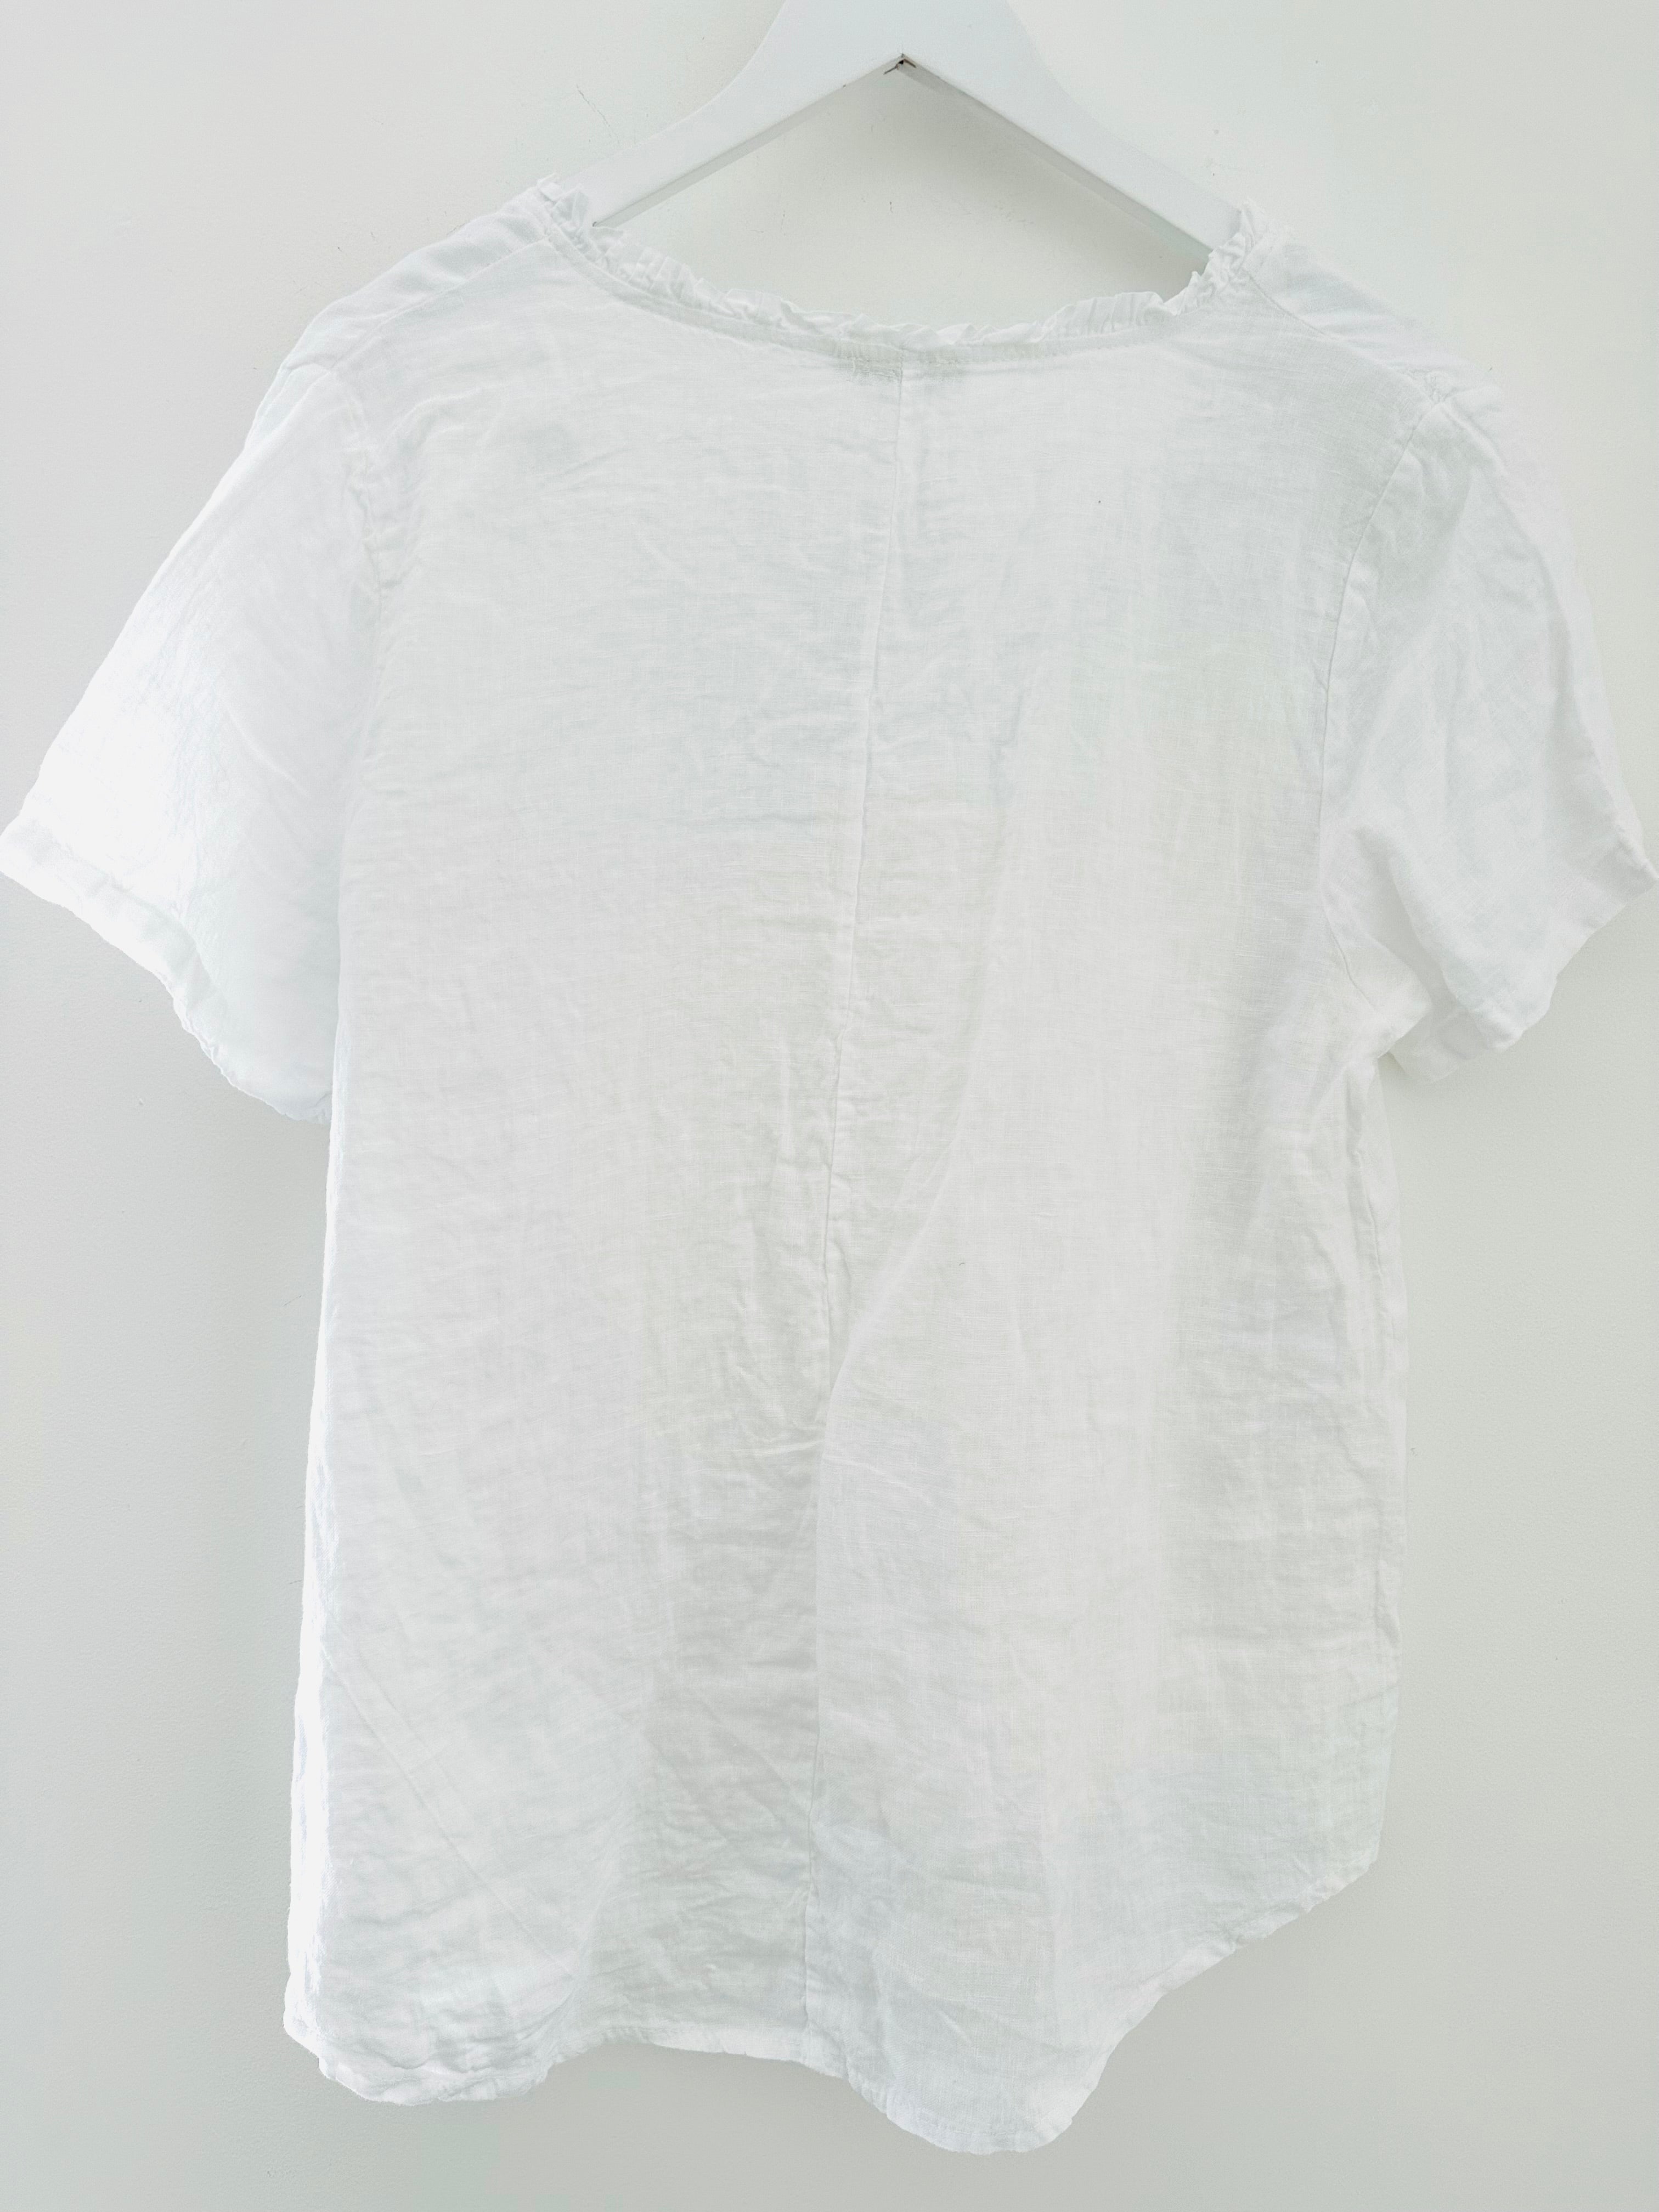 Linen Top with Embroidered Flowers in White